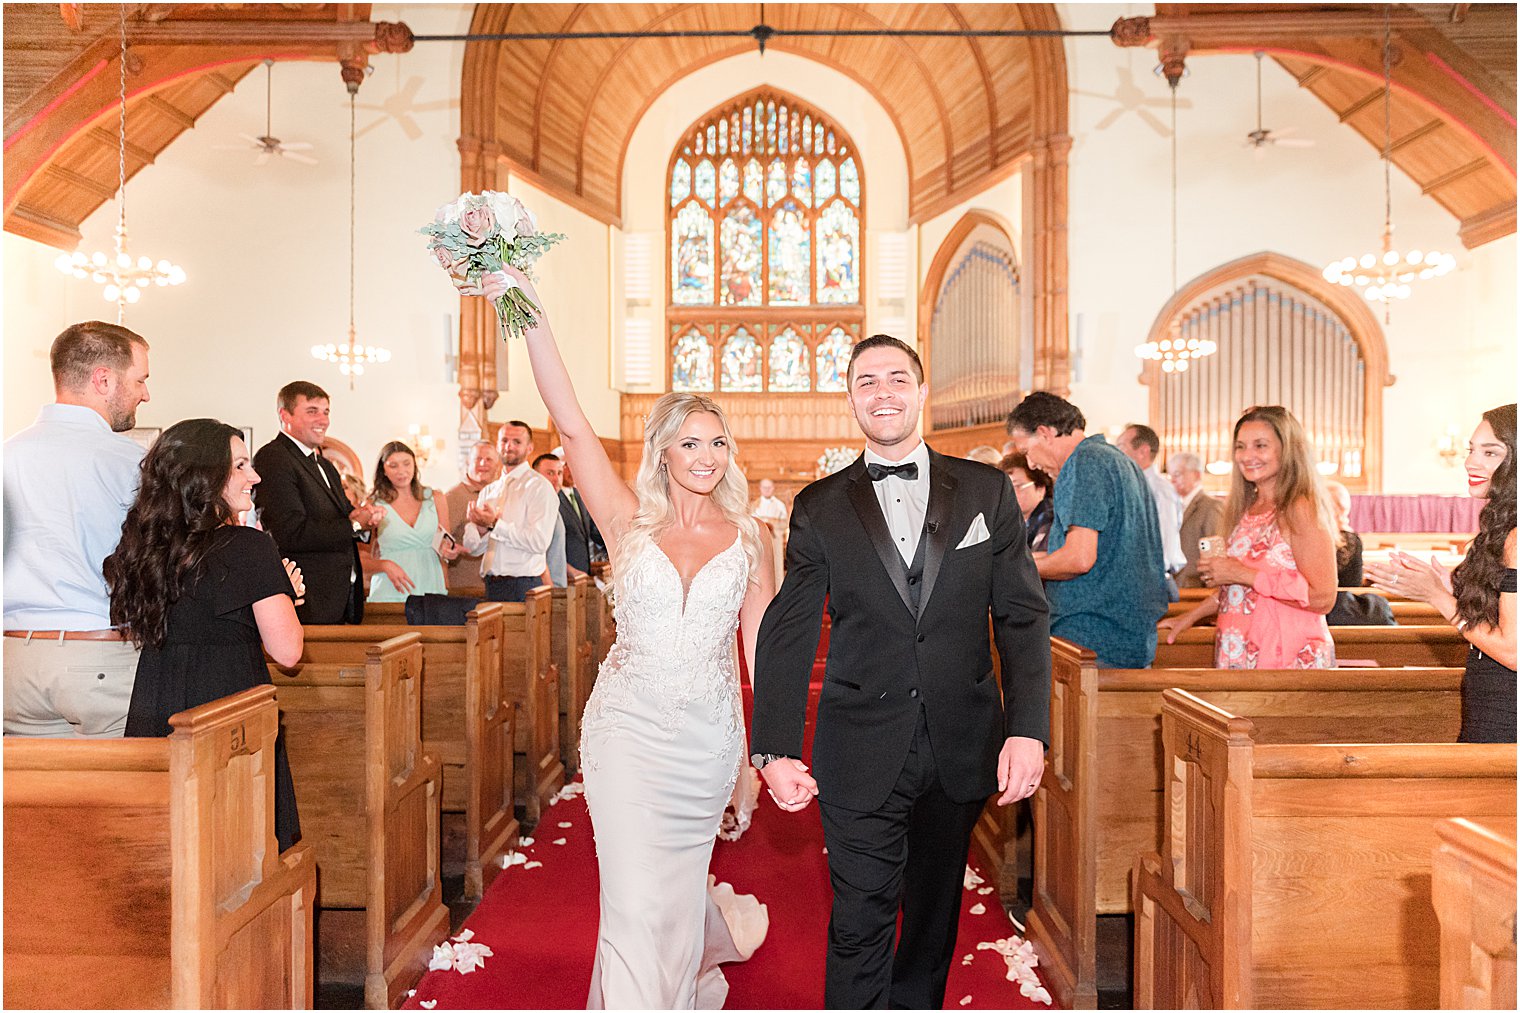 newlyweds cheer walking up aisle after traditional church wedding in New Jersey